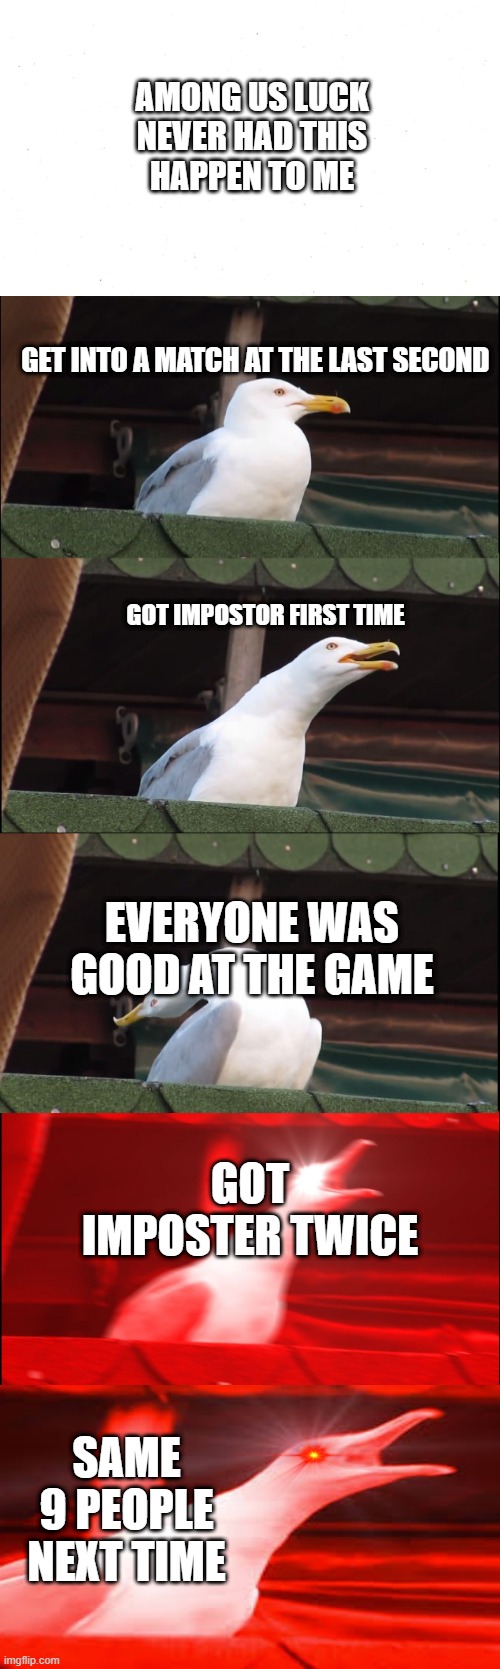 Inhaling Seagull Meme | AMONG US LUCK

NEVER HAD THIS HAPPEN TO ME; GET INTO A MATCH AT THE LAST SECOND; GOT IMPOSTOR FIRST TIME; EVERYONE WAS GOOD AT THE GAME; GOT IMPOSTER TWICE; SAME 9 PEOPLE NEXT TIME | image tagged in memes,inhaling seagull | made w/ Imgflip meme maker